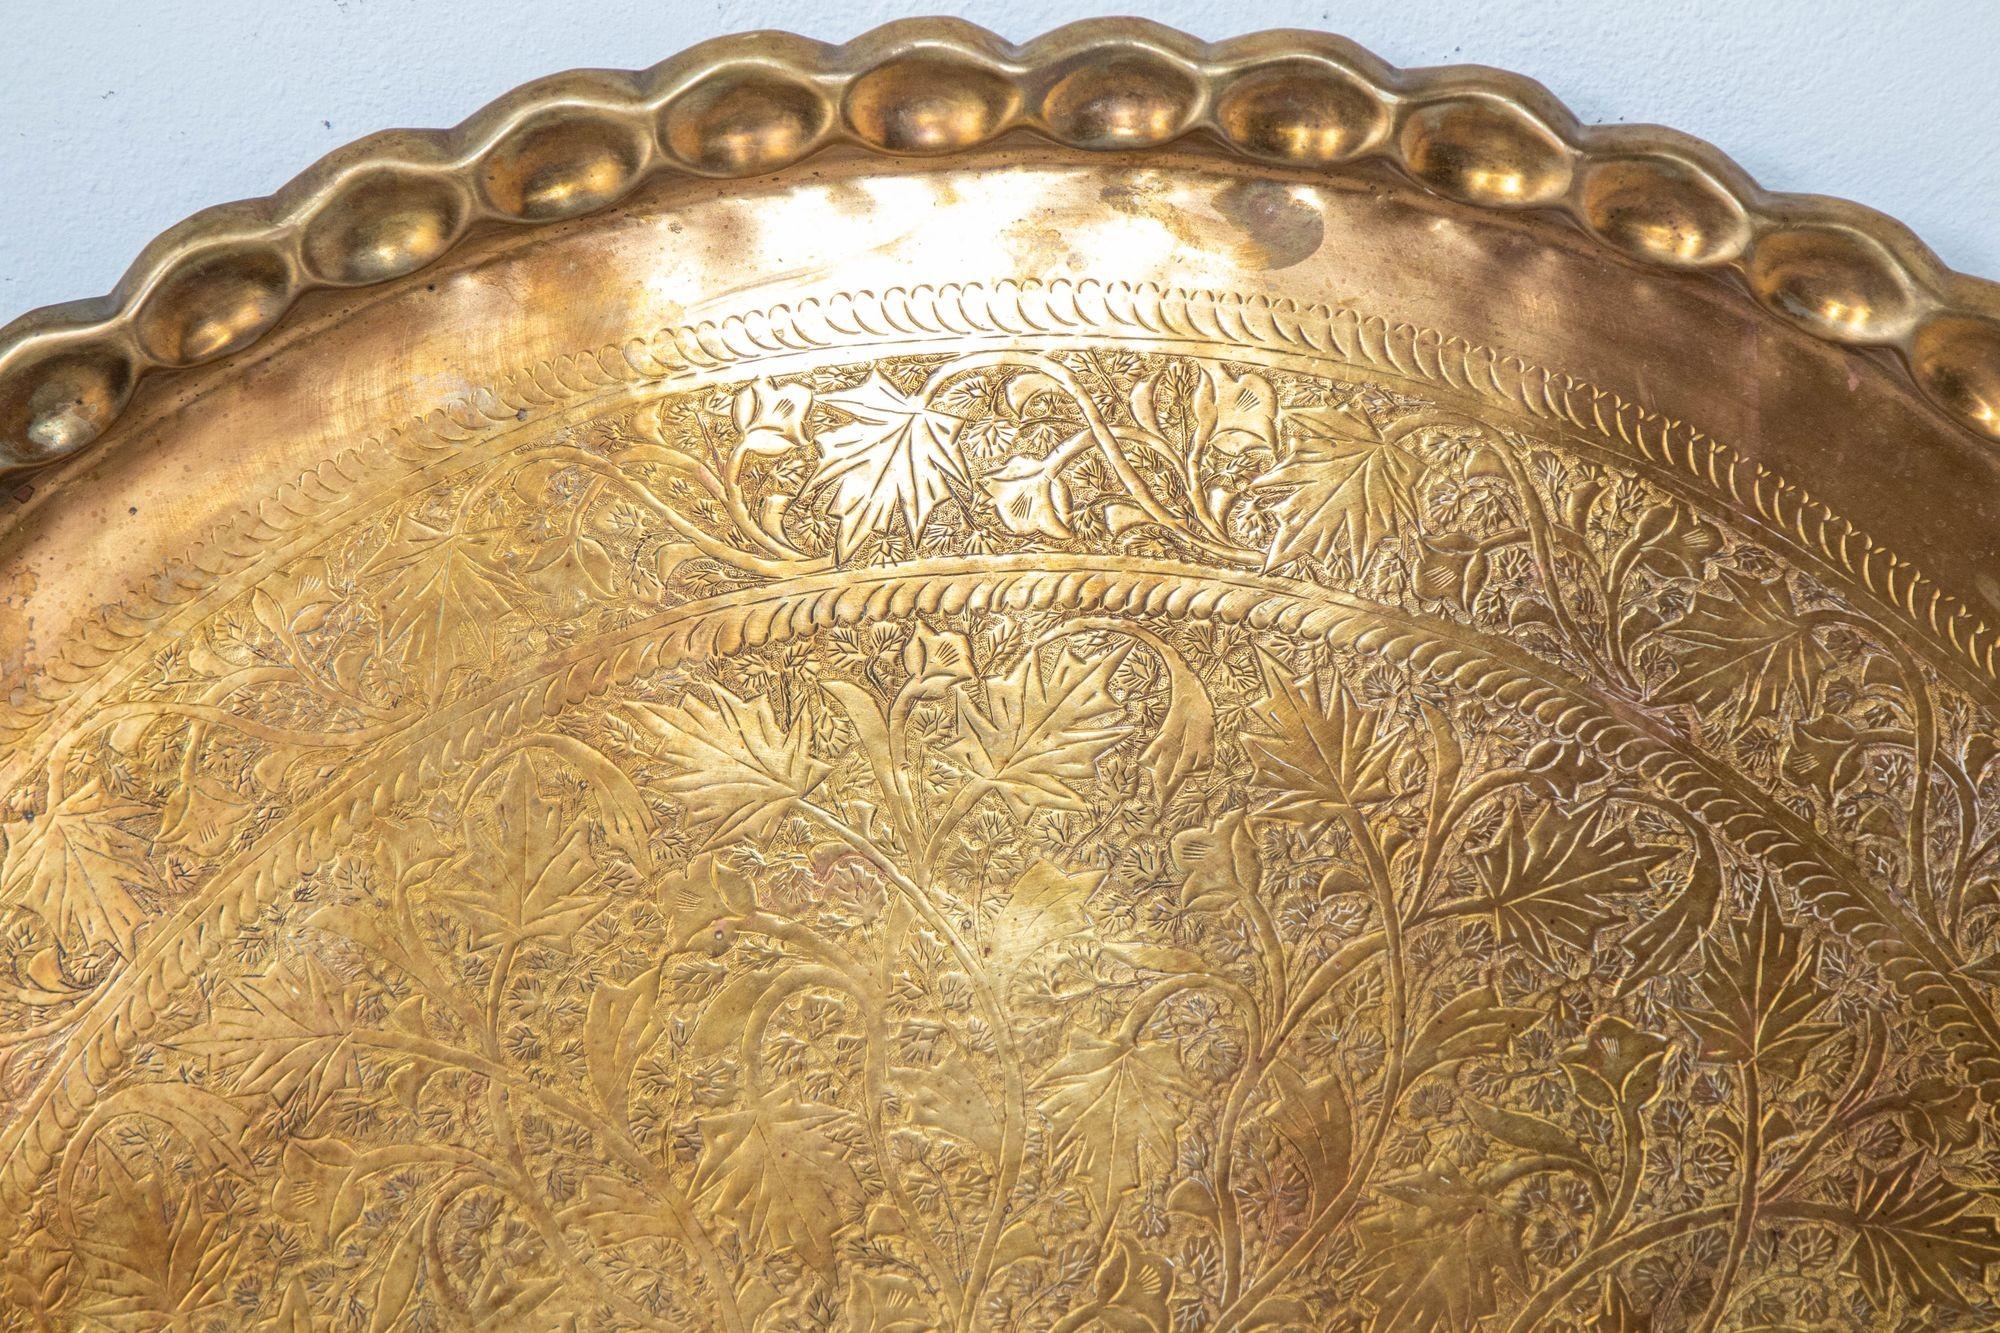 Asian Antique Mughal Rajasthani Large Polished round Brass Tray with crest edges, 37 inches in diameter.
Rare find, large antique brass tray 37 inches diameter finely engraved and hammered with floral Mughal Rajasthani Moorish designs.
Museum